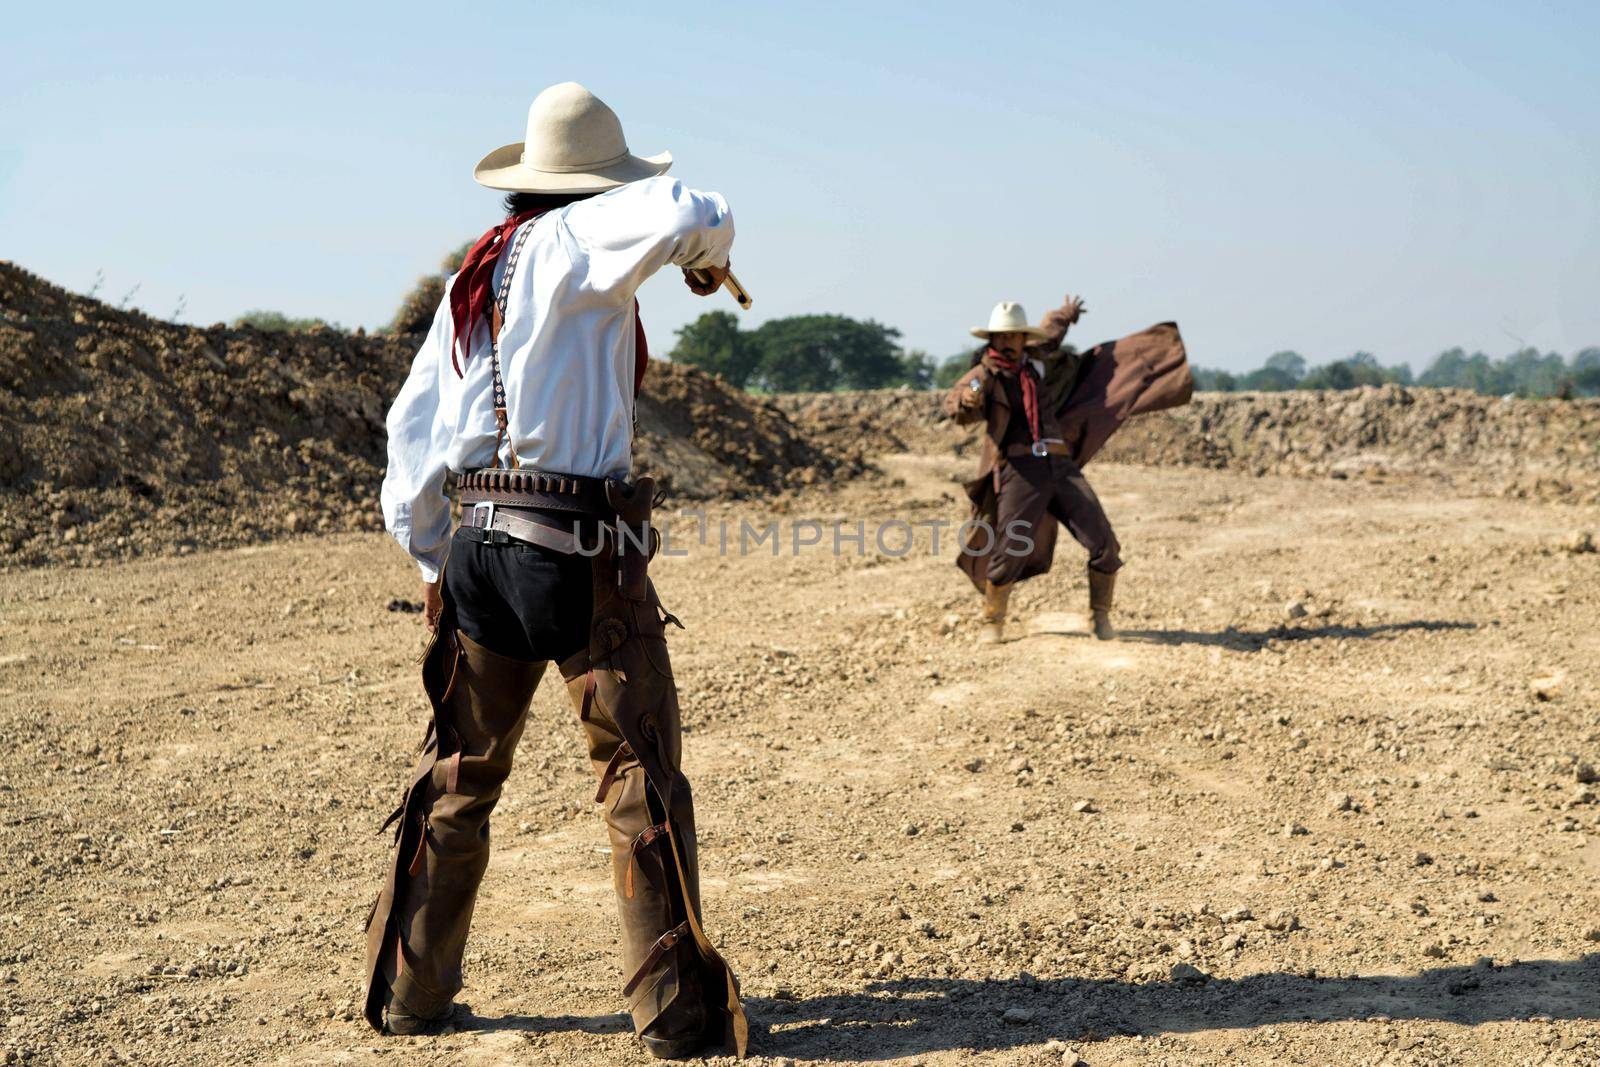 Two cowboy outfit costume with a gun held in the hand on gun fight against smoke and sun light on the buttle field. by chuanchai